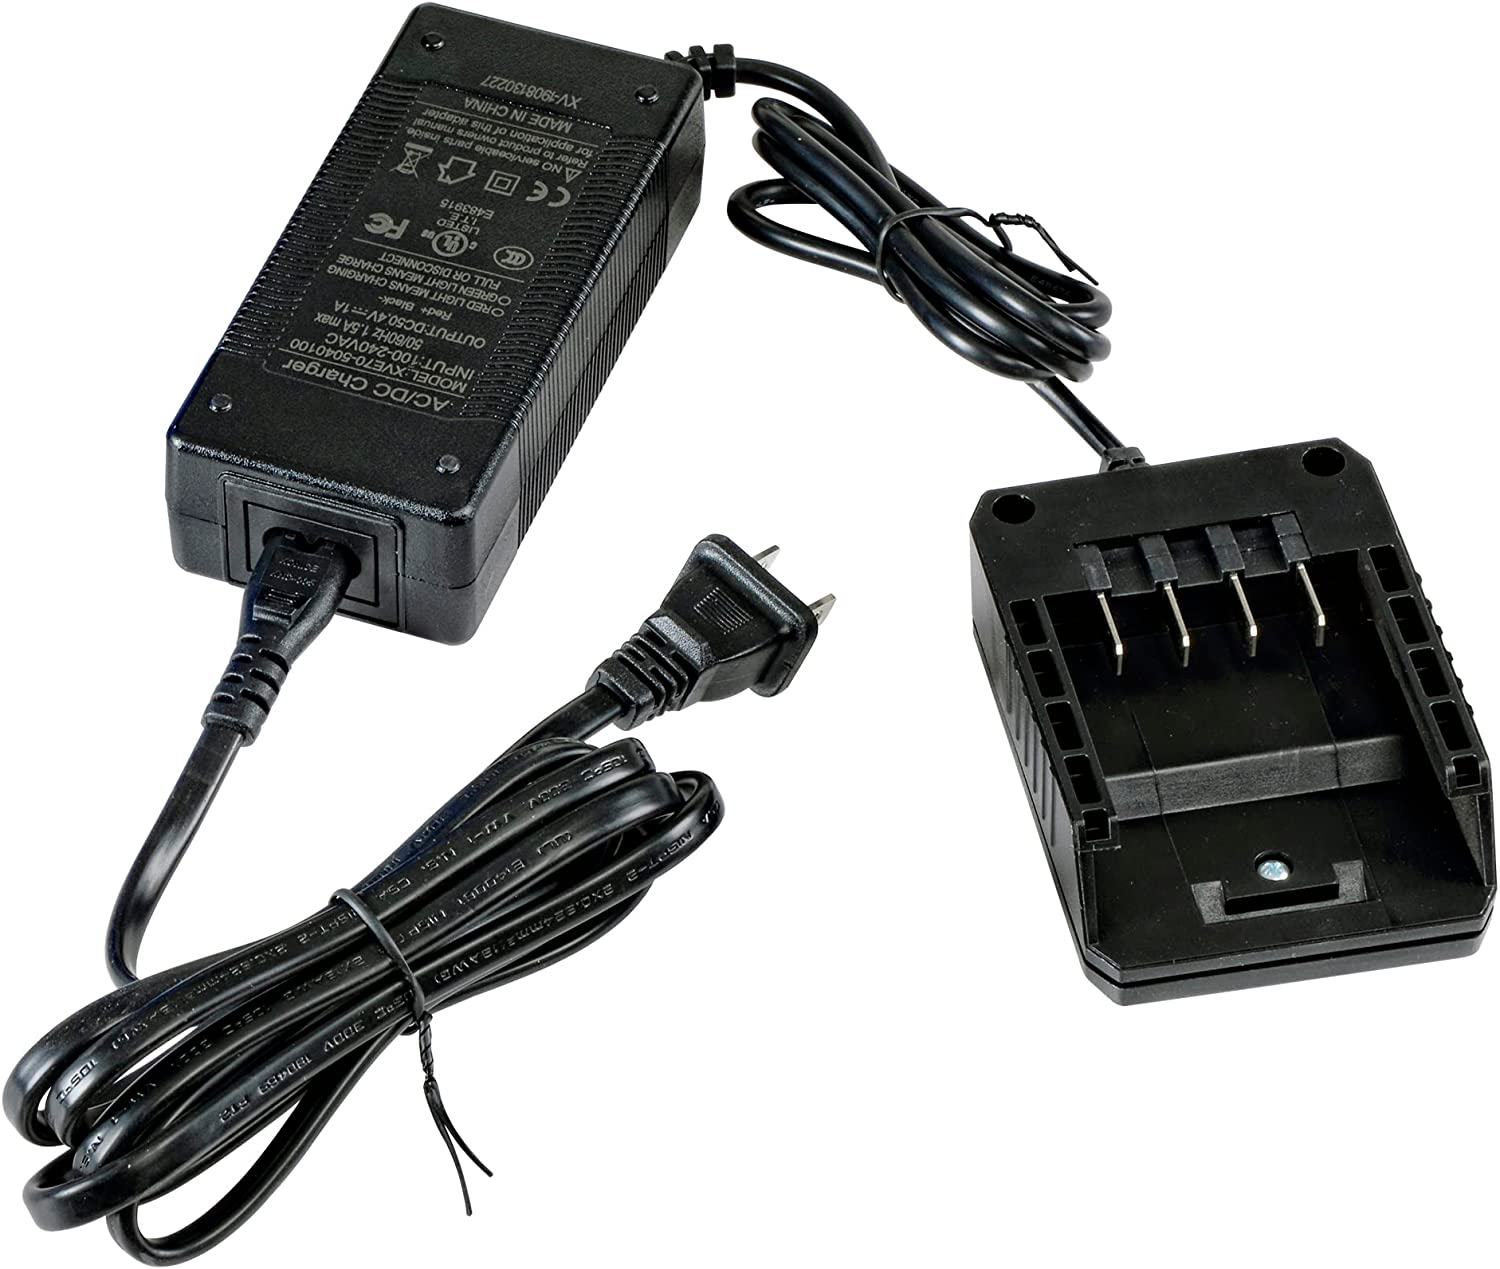 48V LITHIUM ION CHARGER (GUT134)